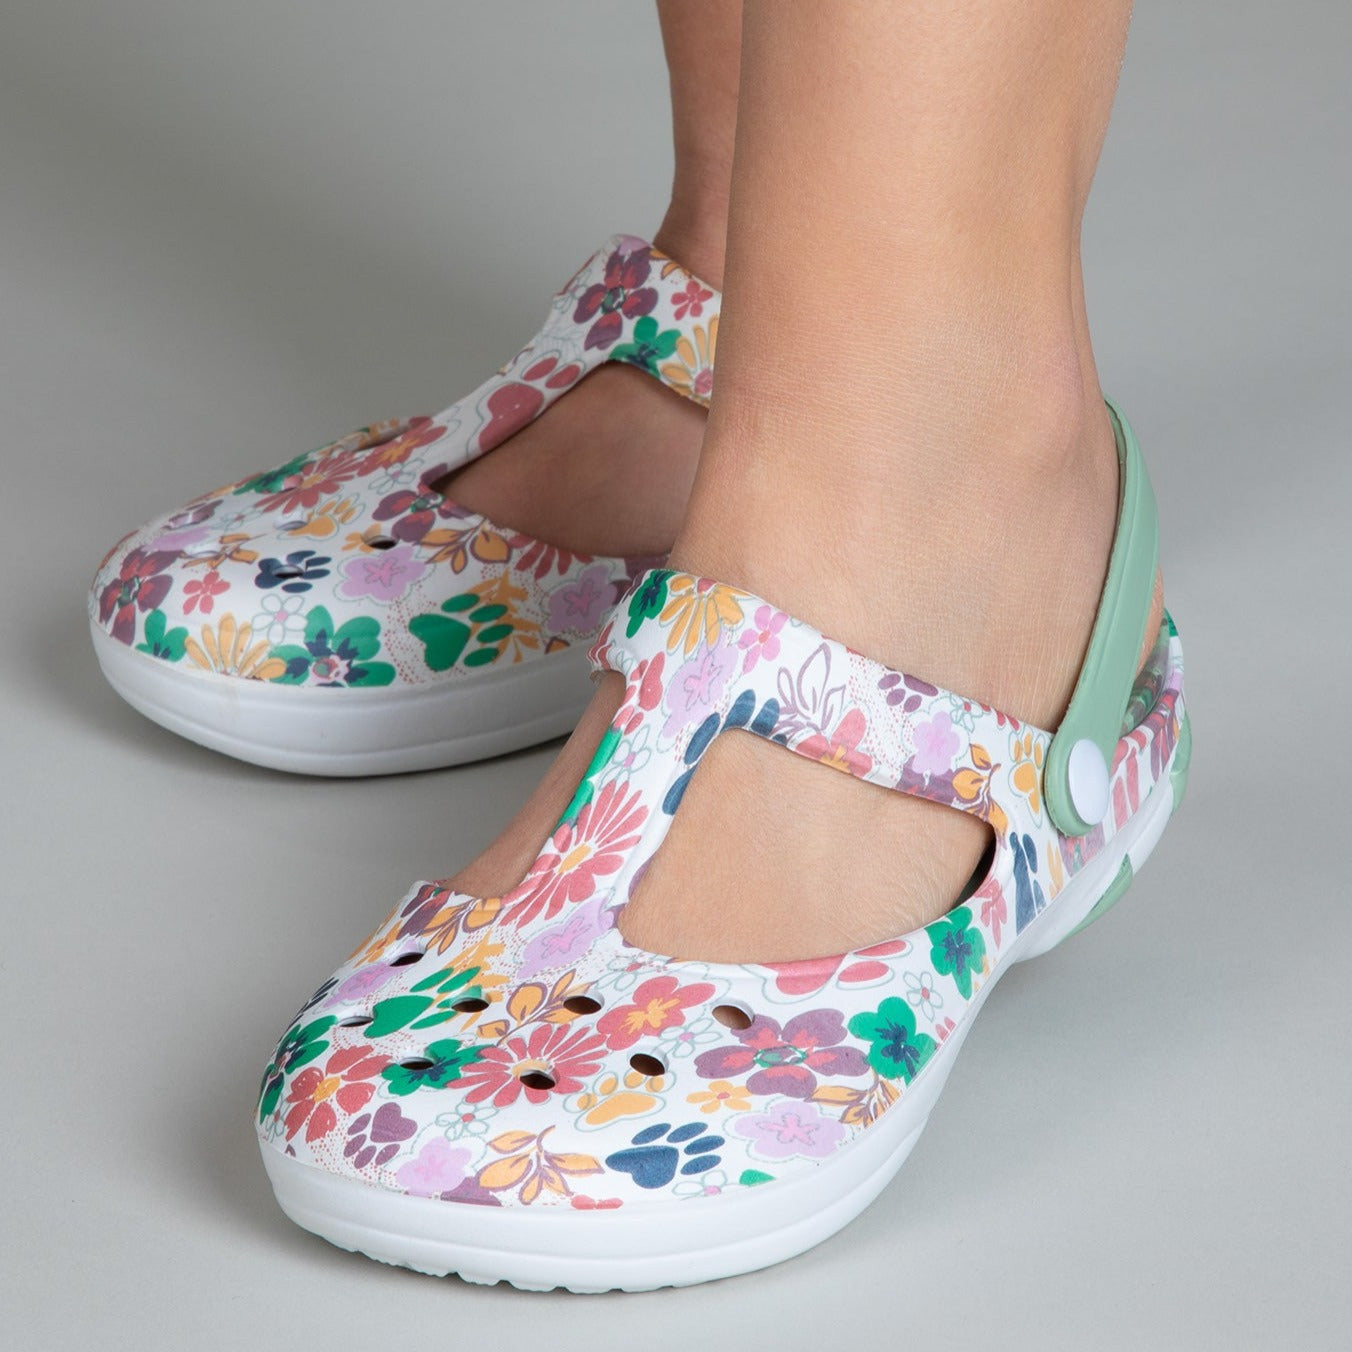 Multicolored Mary Jane Clogs - Flowers & Paws - 6